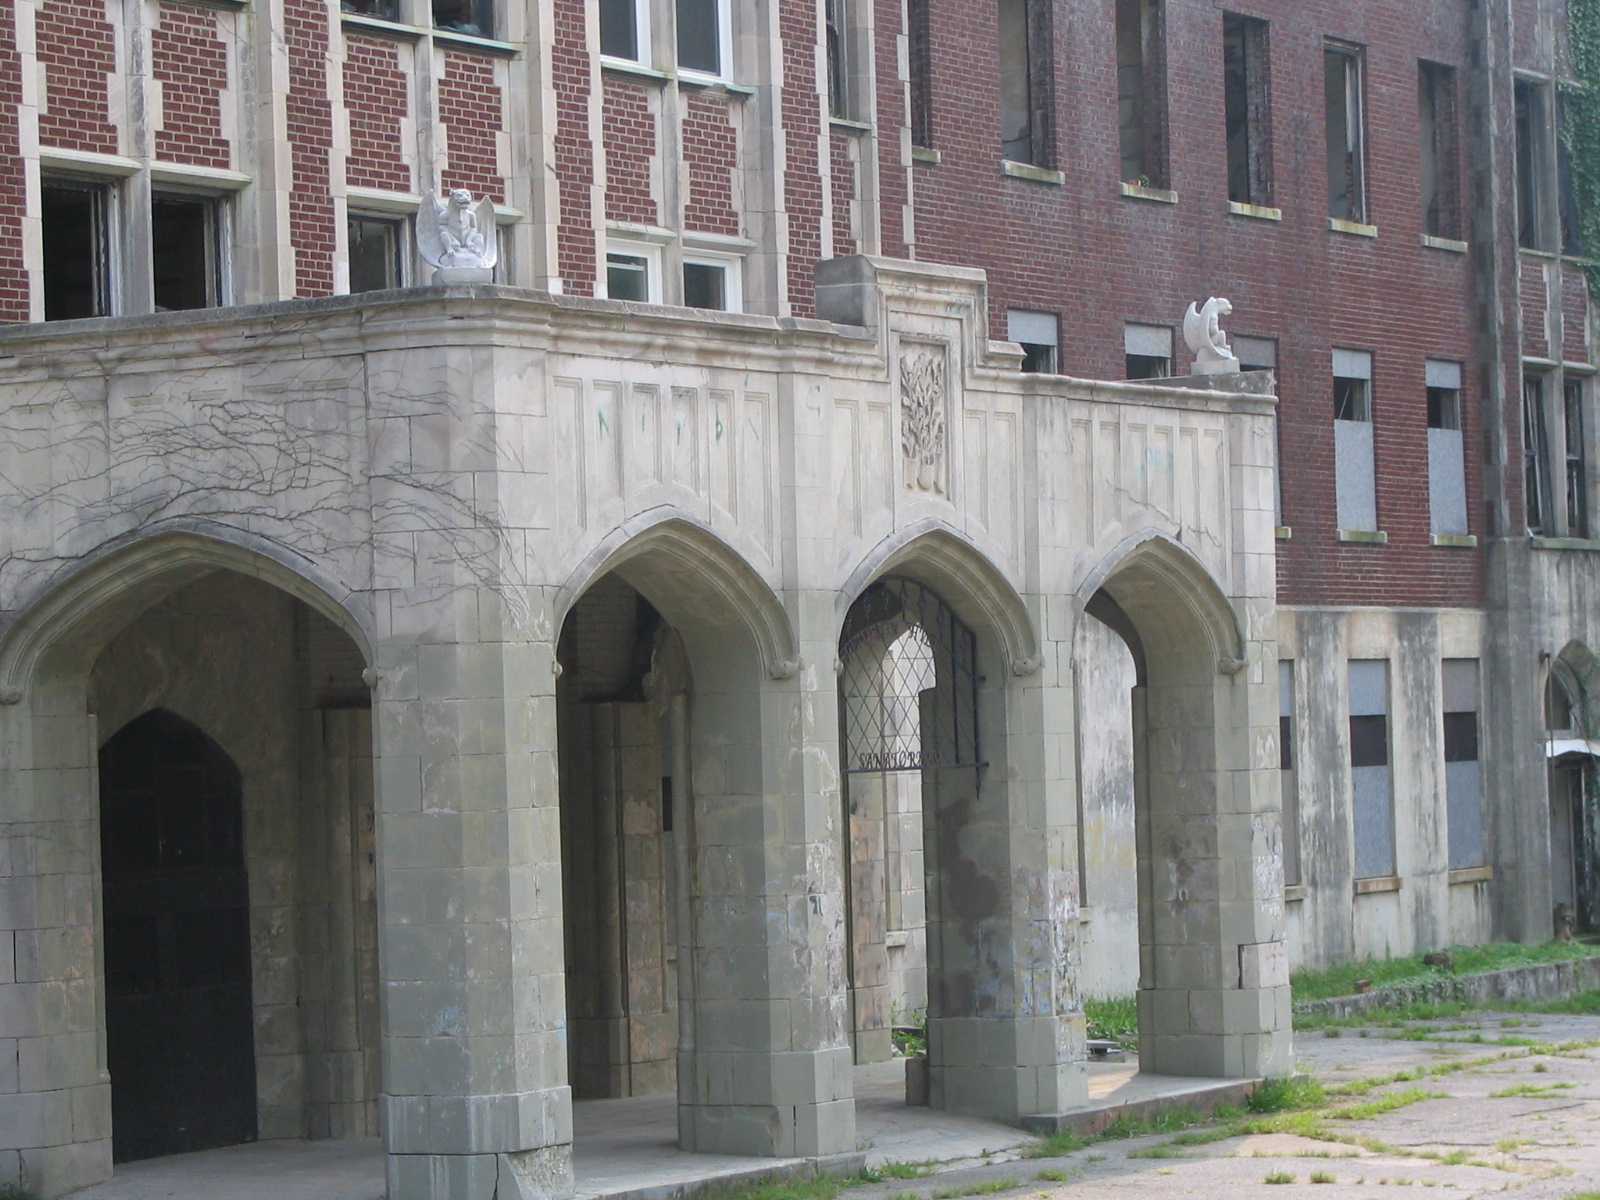 REWitched: The history of Waverly Hills